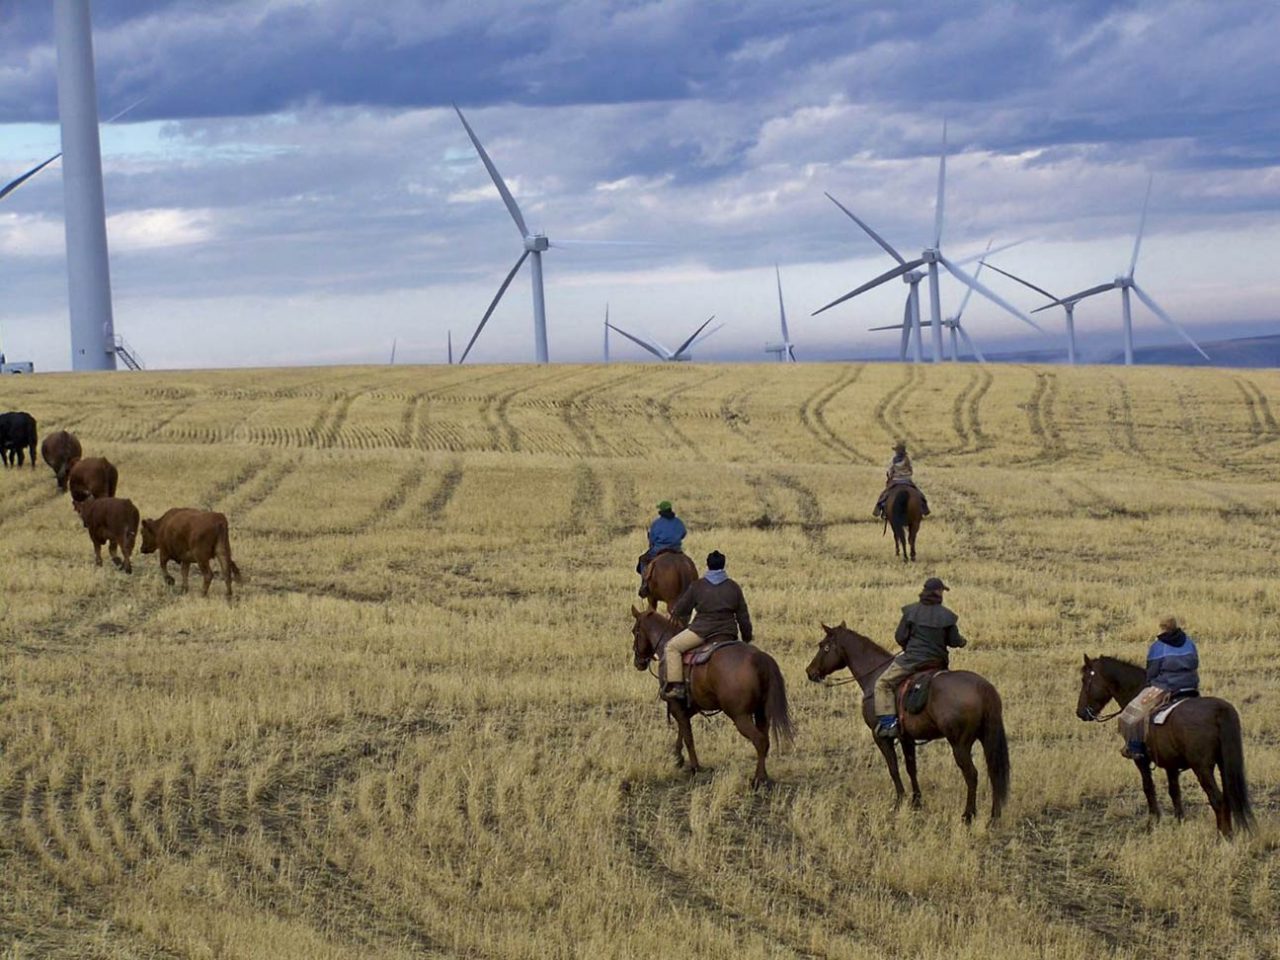 People riding horses with wind turbines